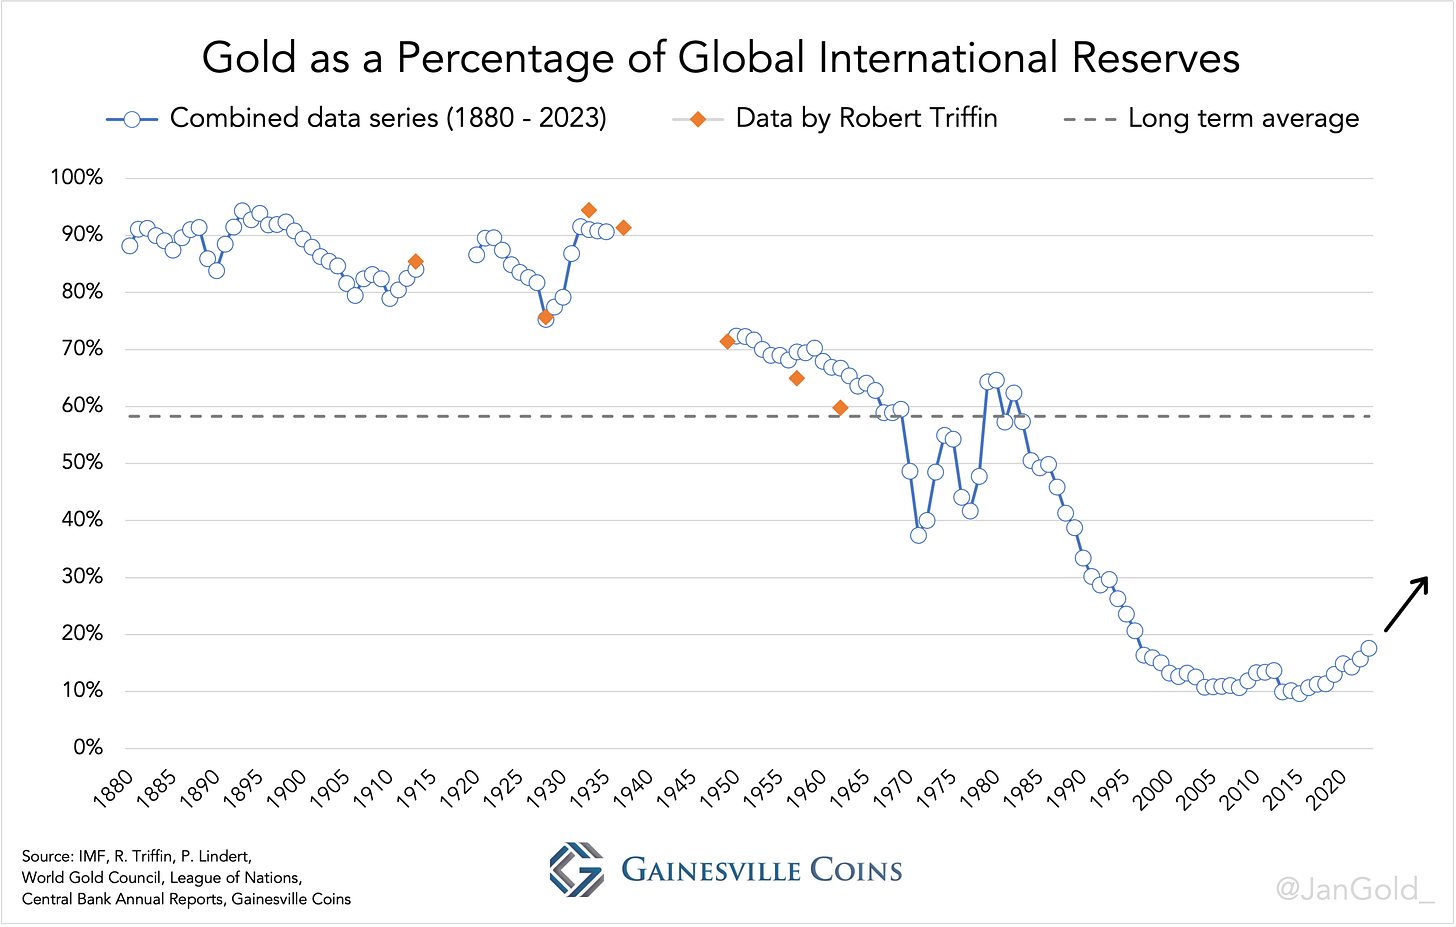 Gold as a Percentage of Global International Reserves